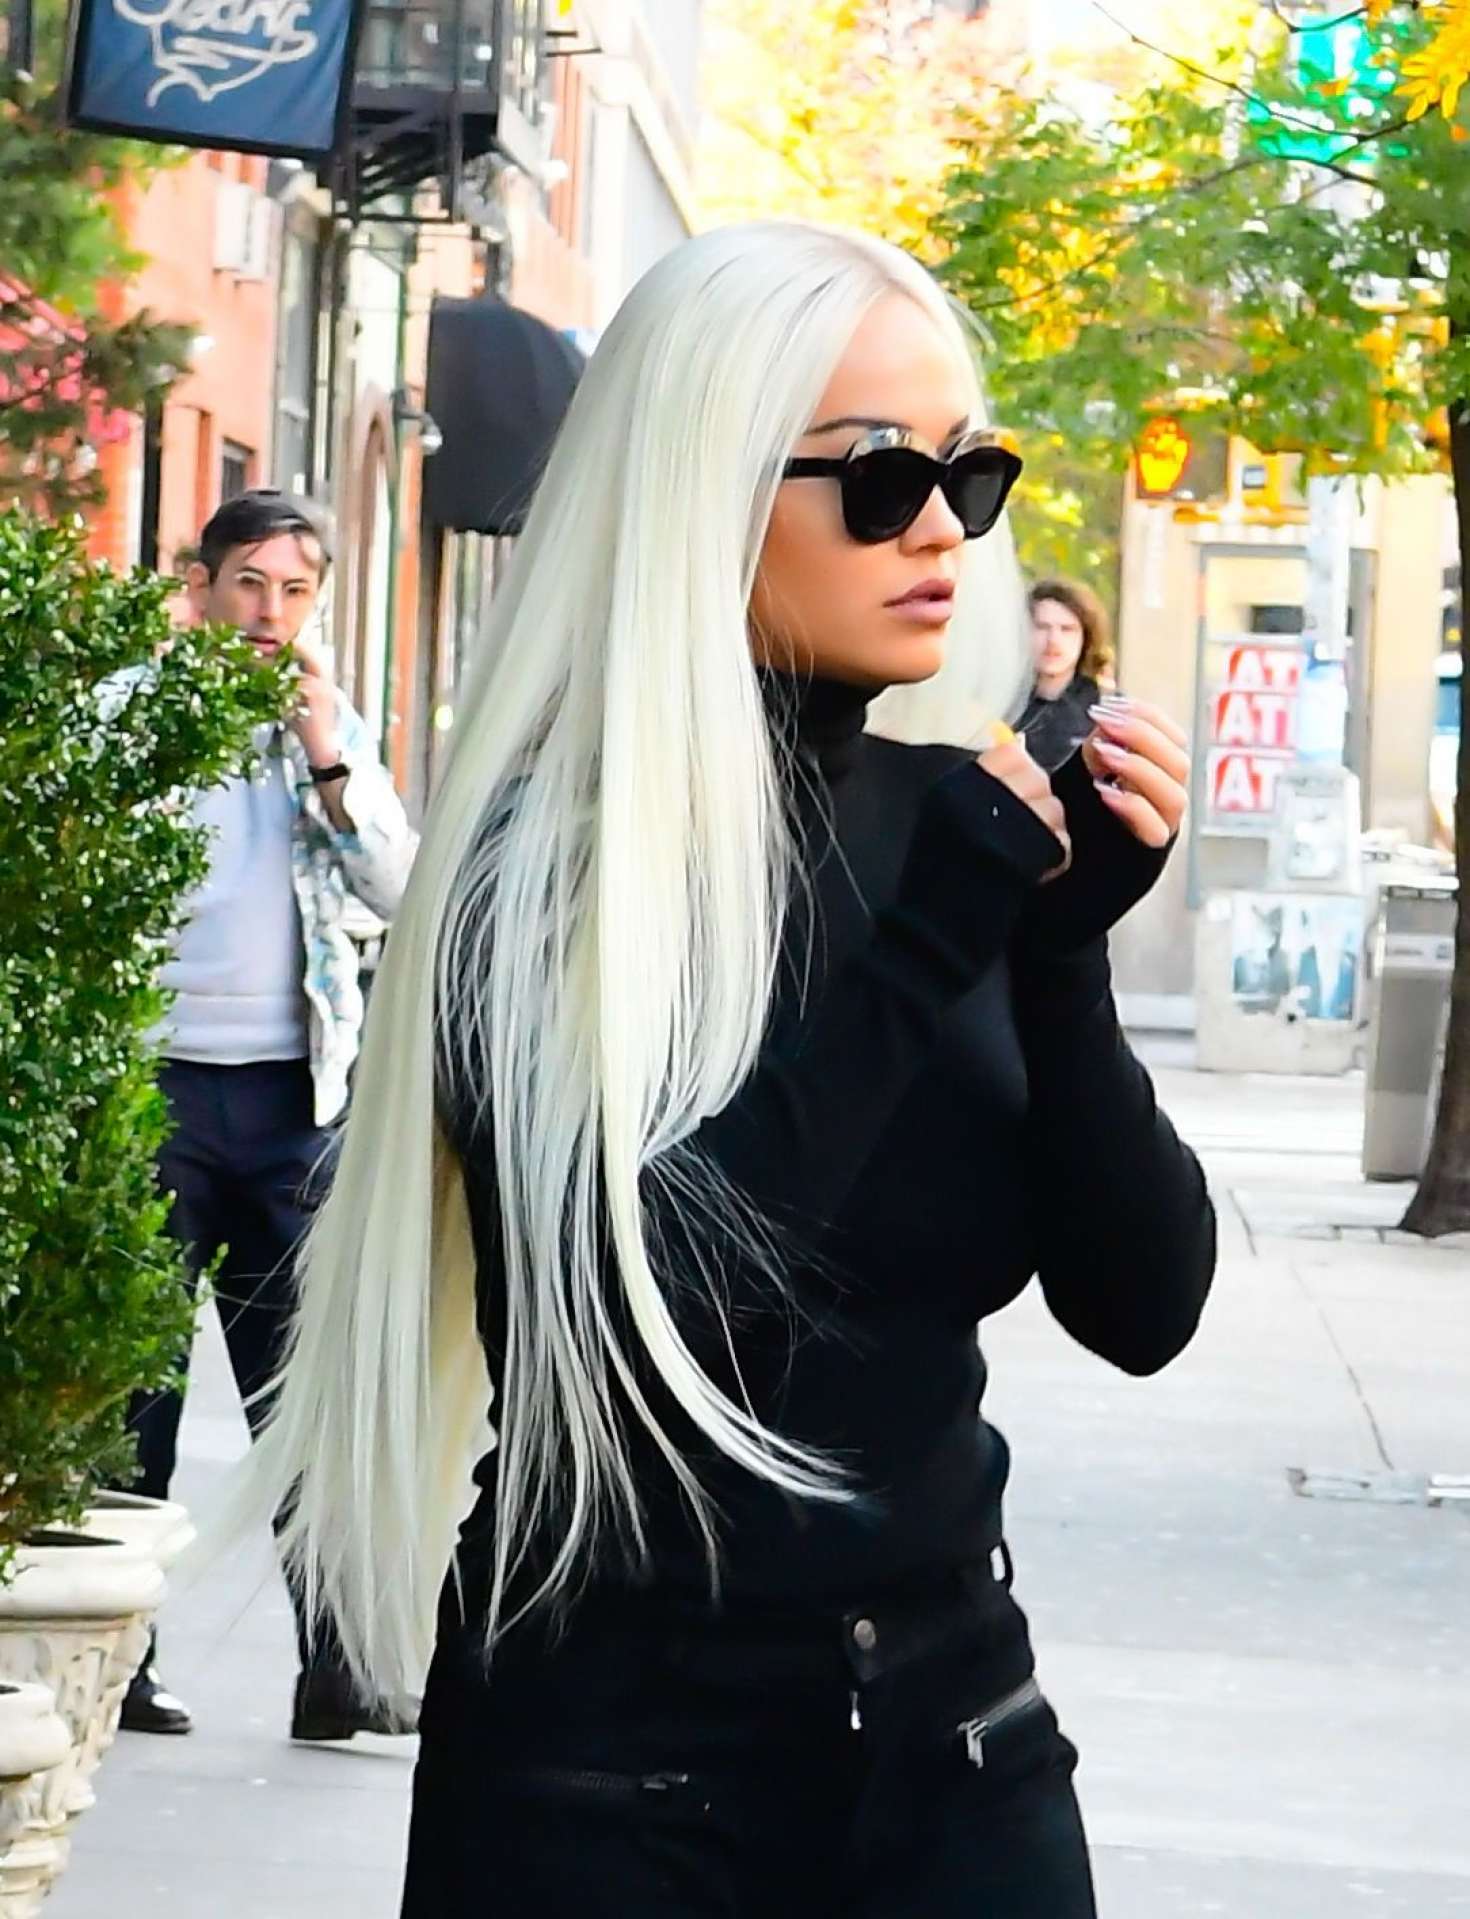 Rita Ora â€“ Out and about in NYC